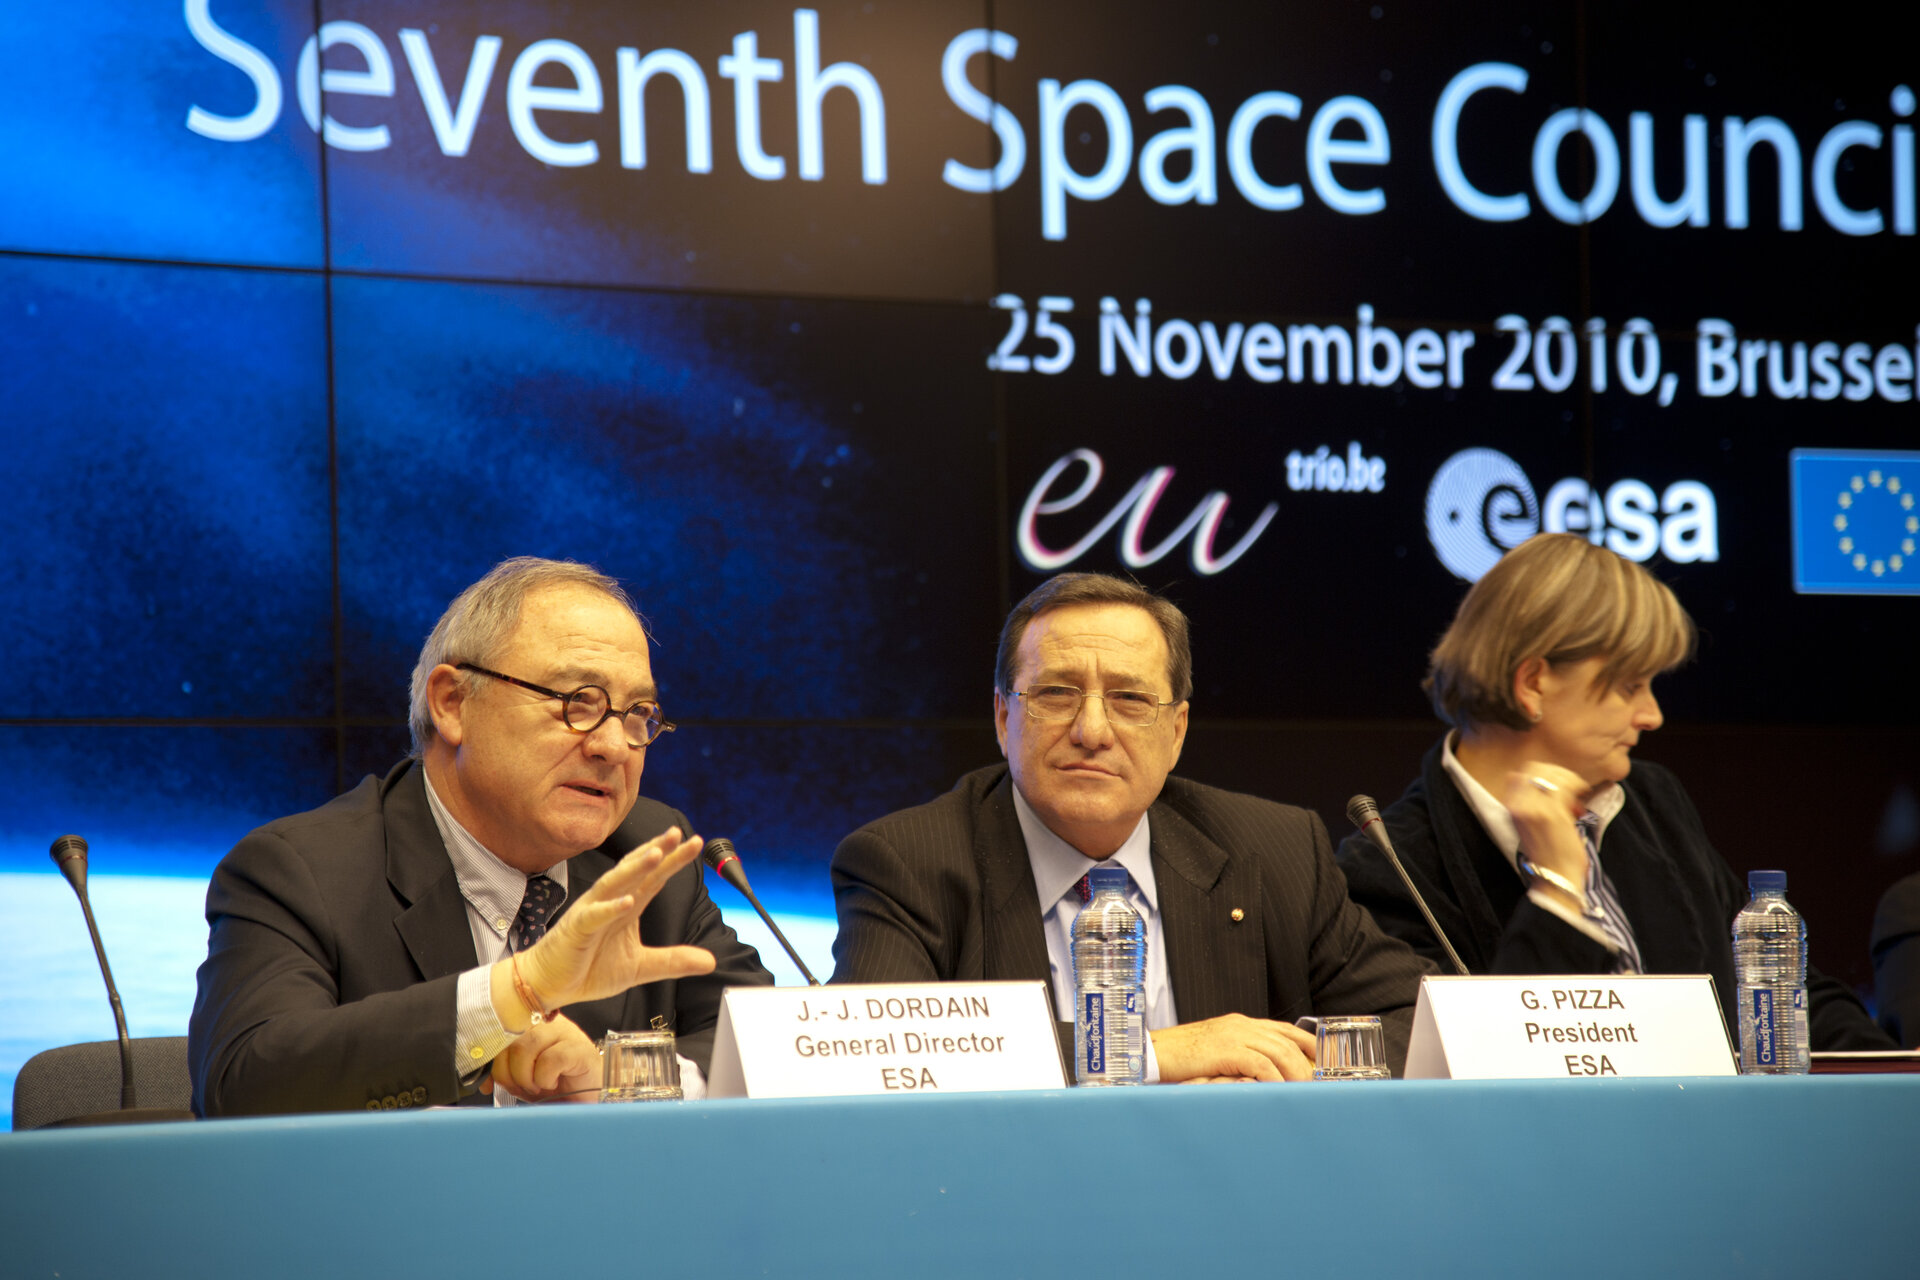 Jean-Jacques Dordain, during the 7th Space Council press conference